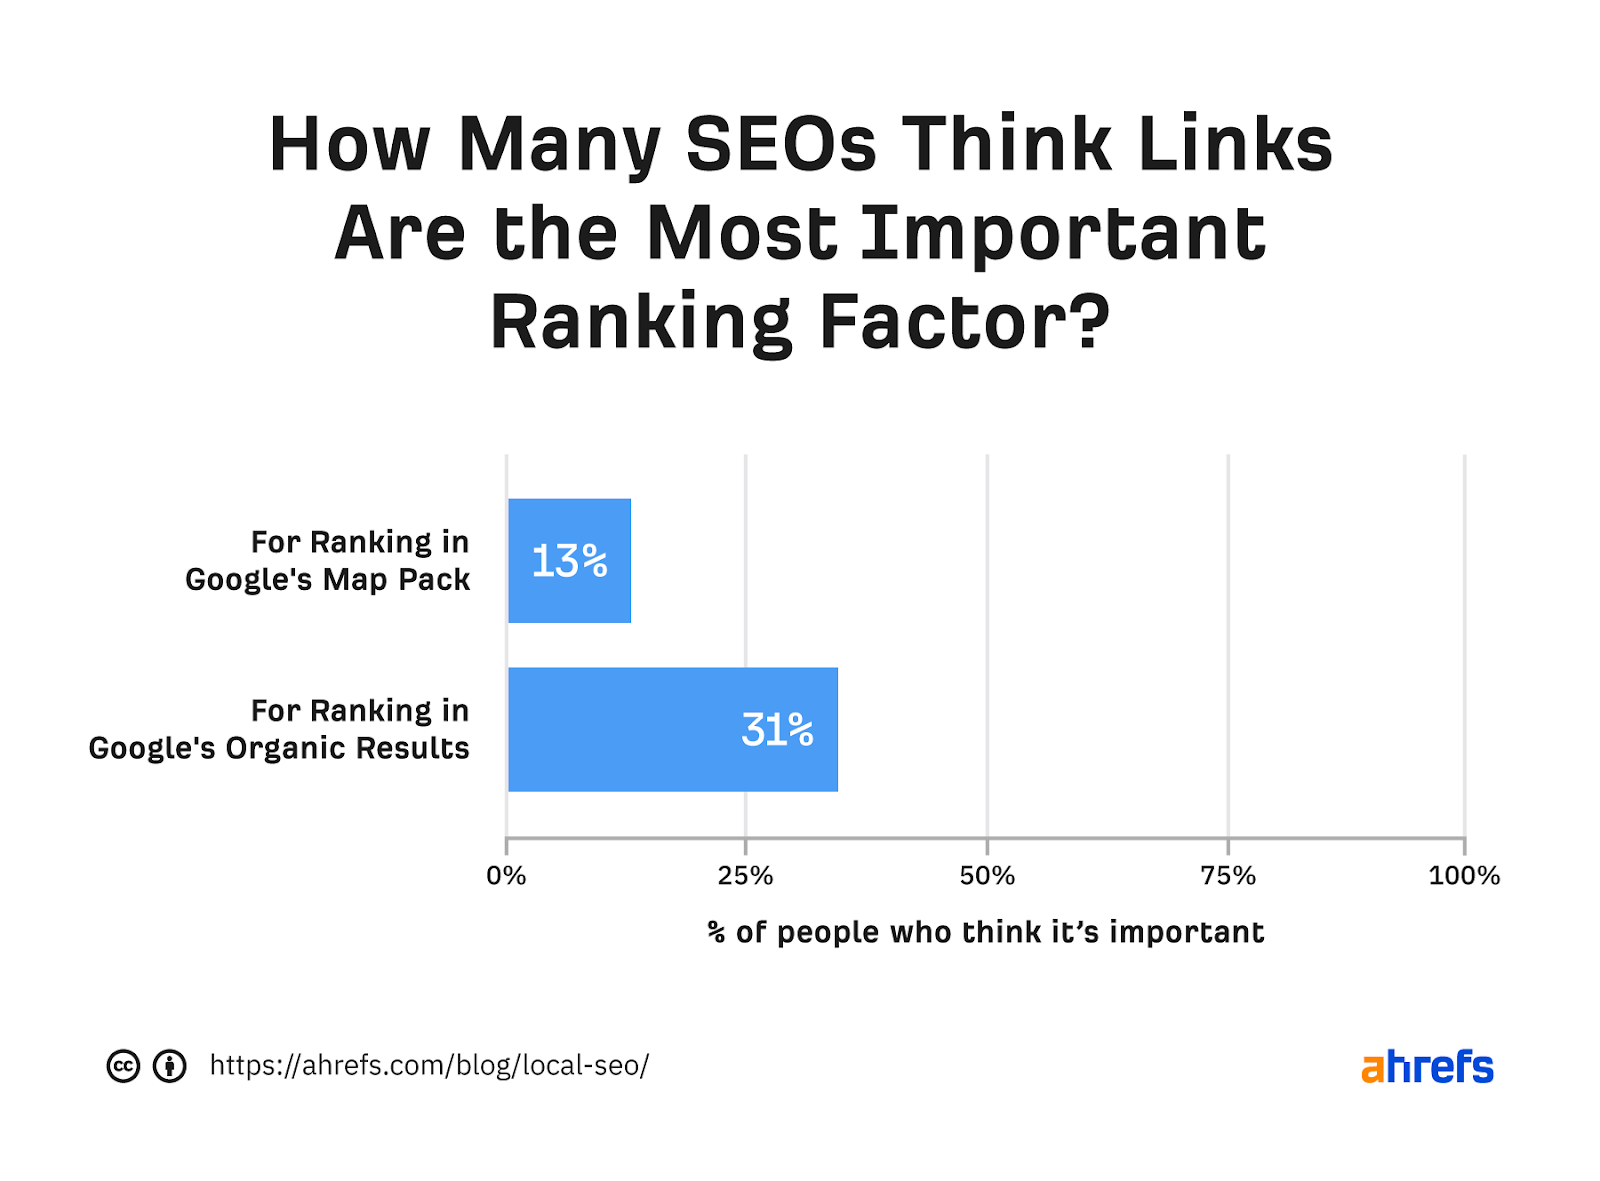 Bar graph showing percentage of SEOs who think links are most important ranking factor for 